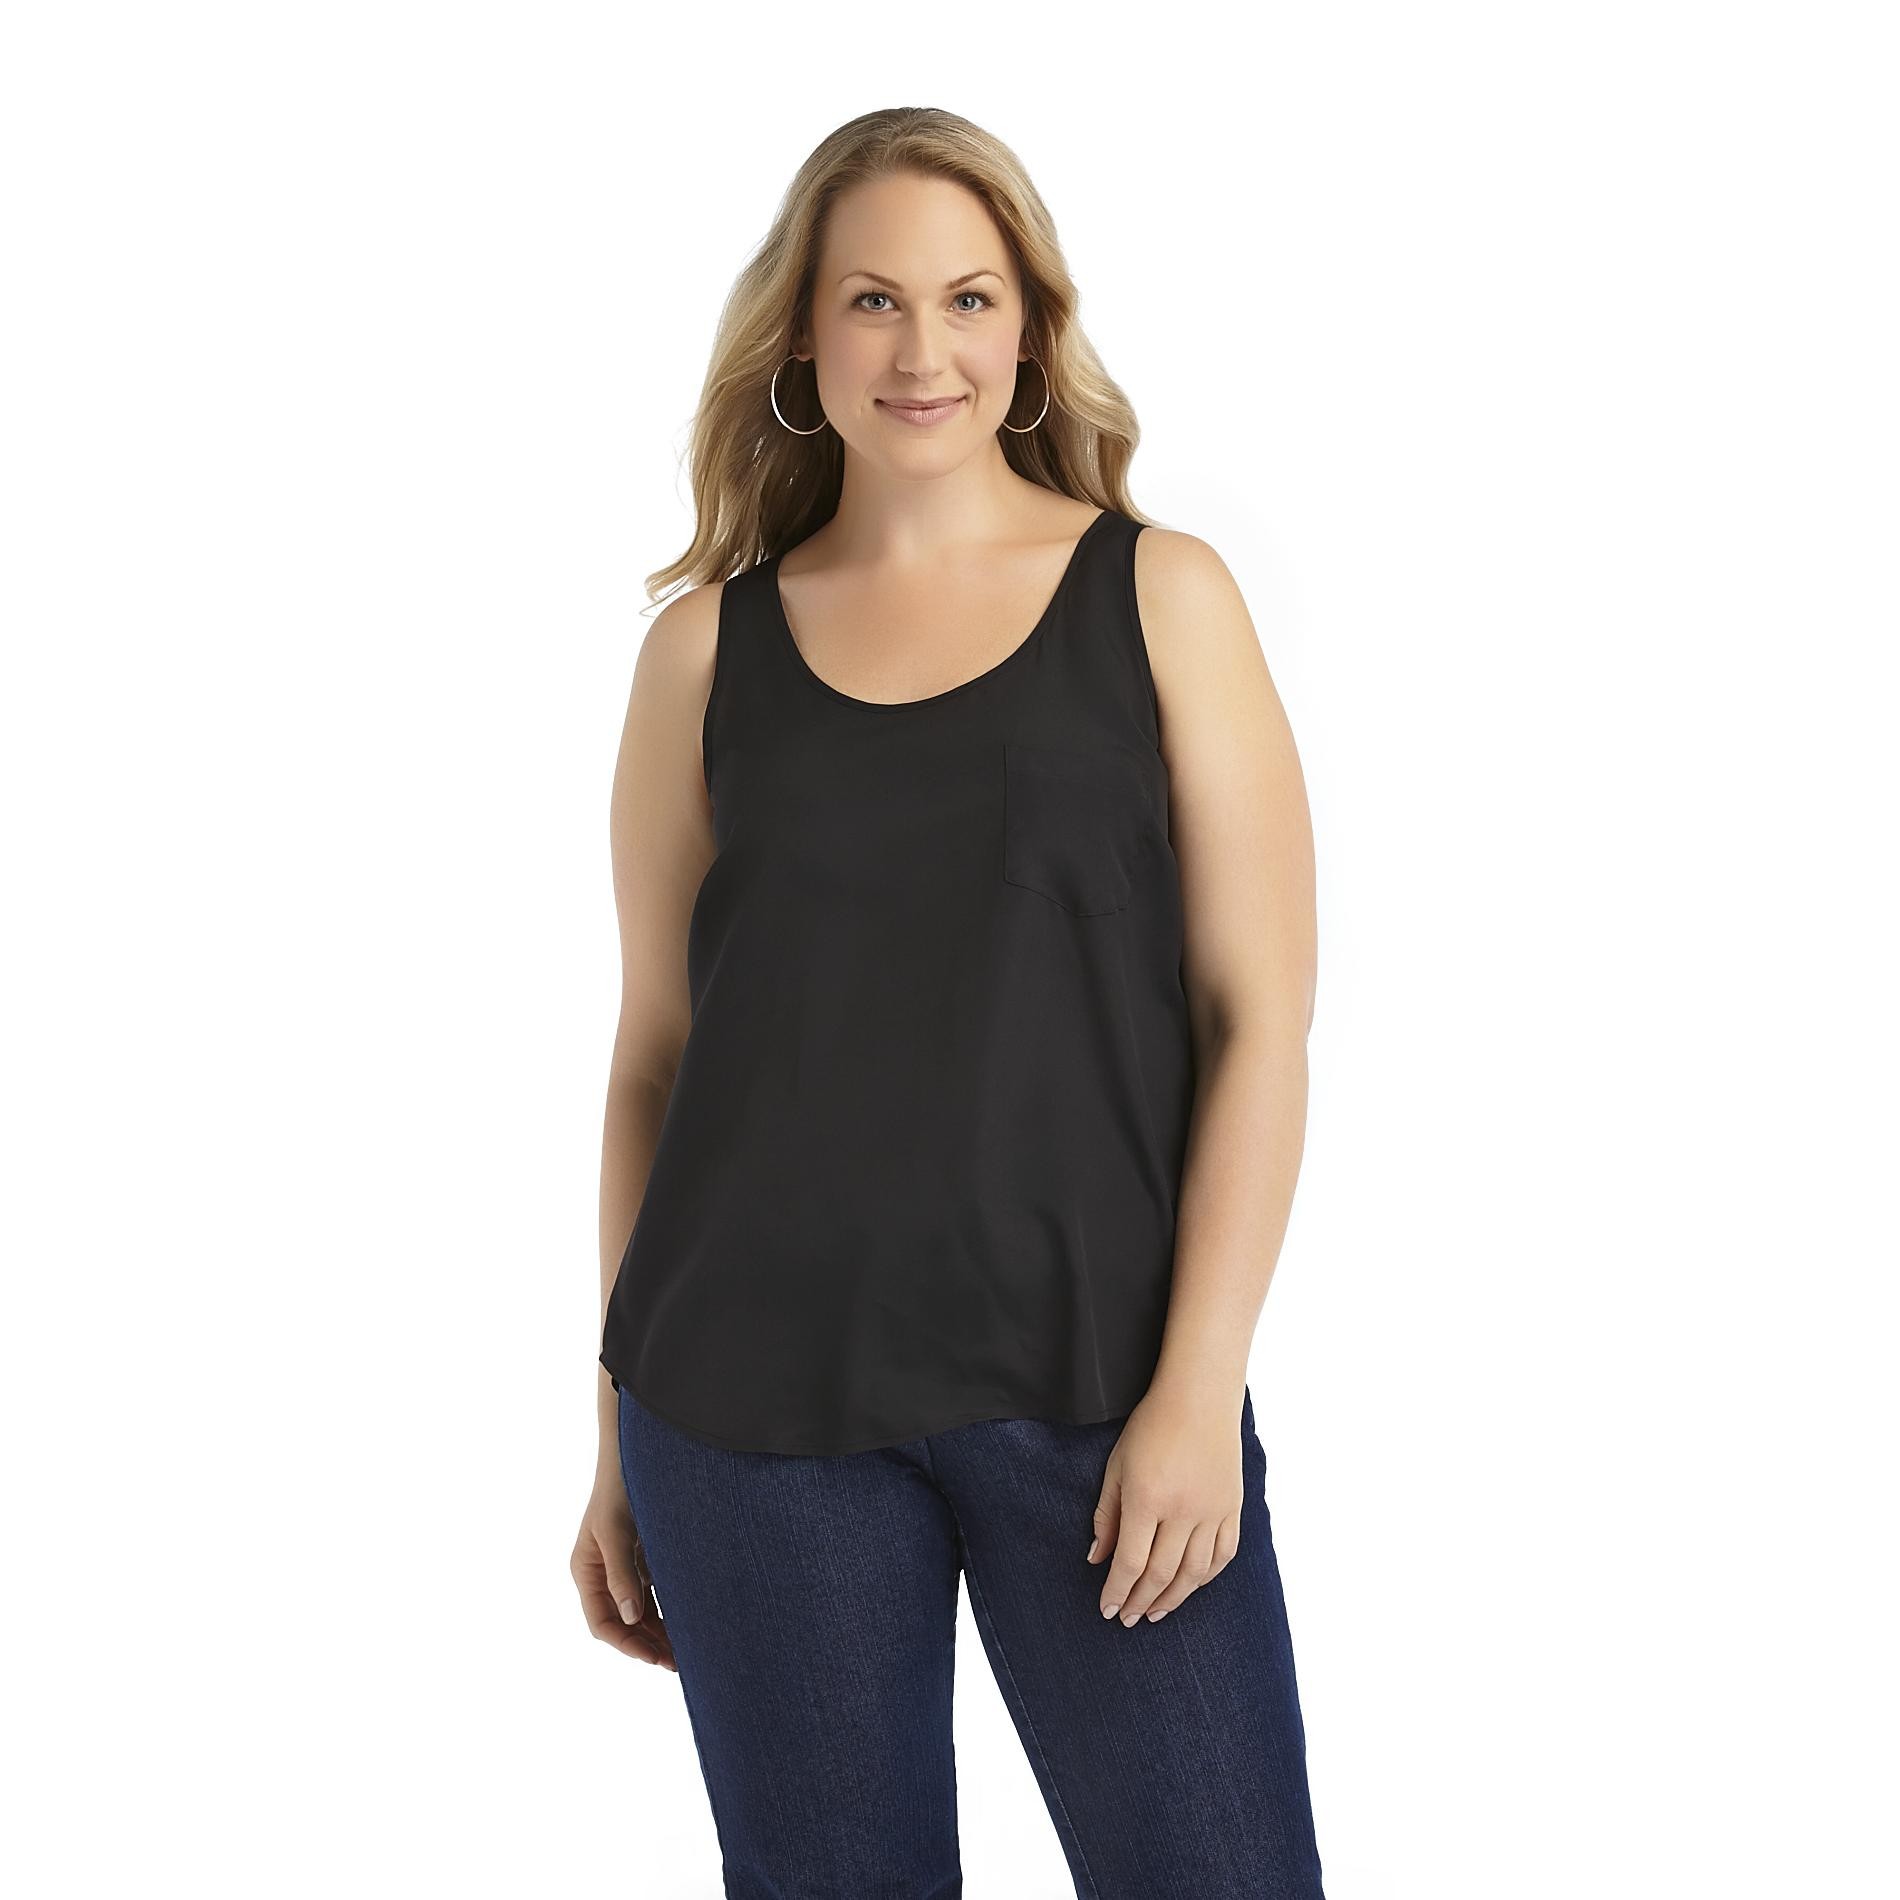 Love Your Style, Love Your Size Women's Plus Tank Top